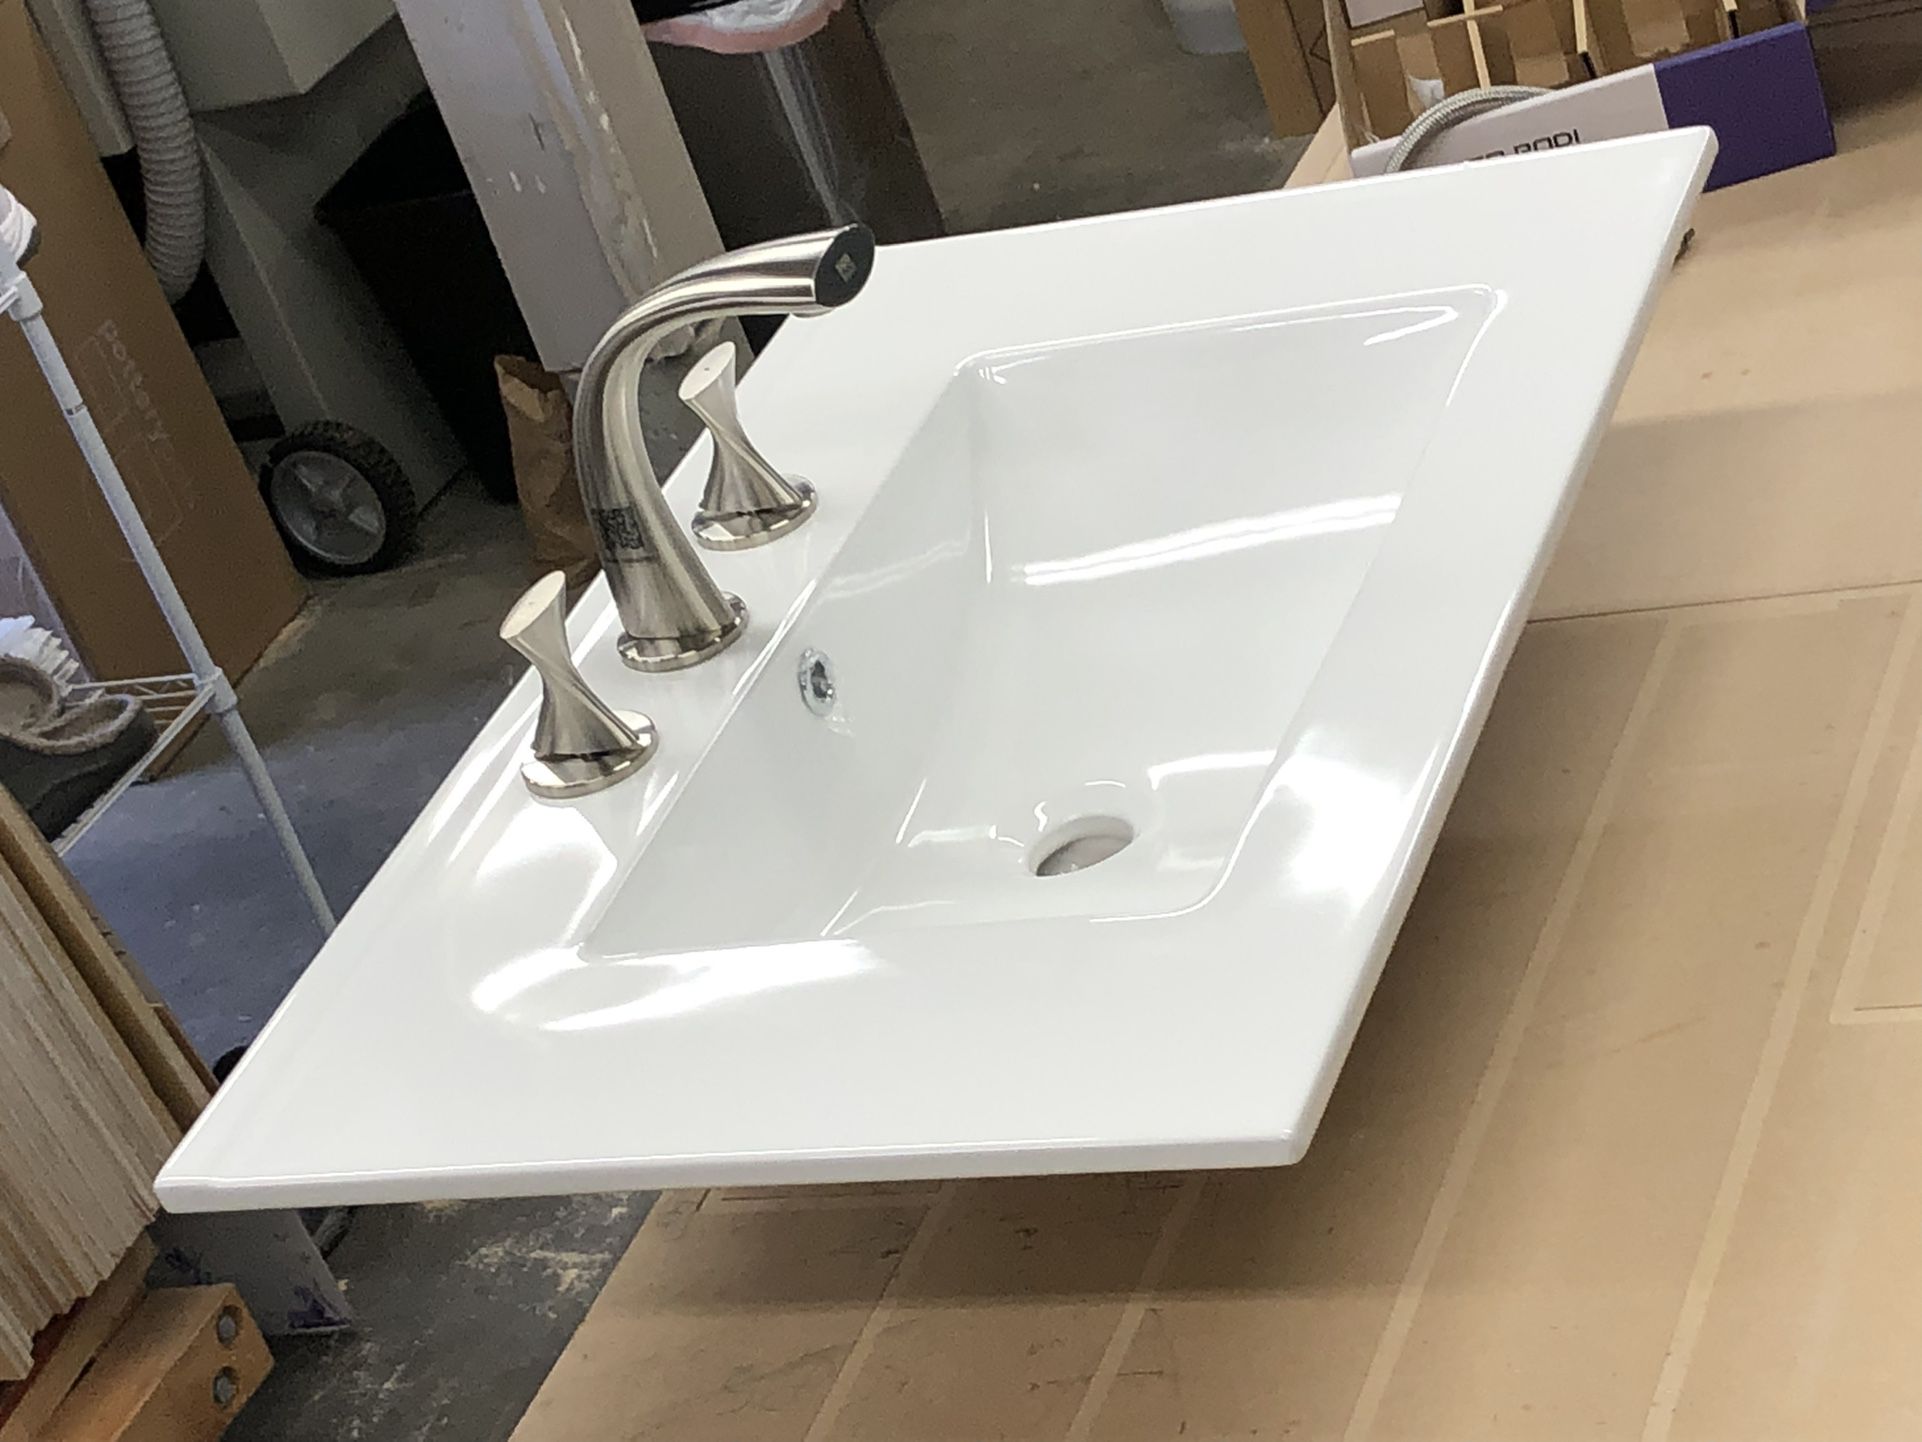 Pair Of Sinks With modern Faucet